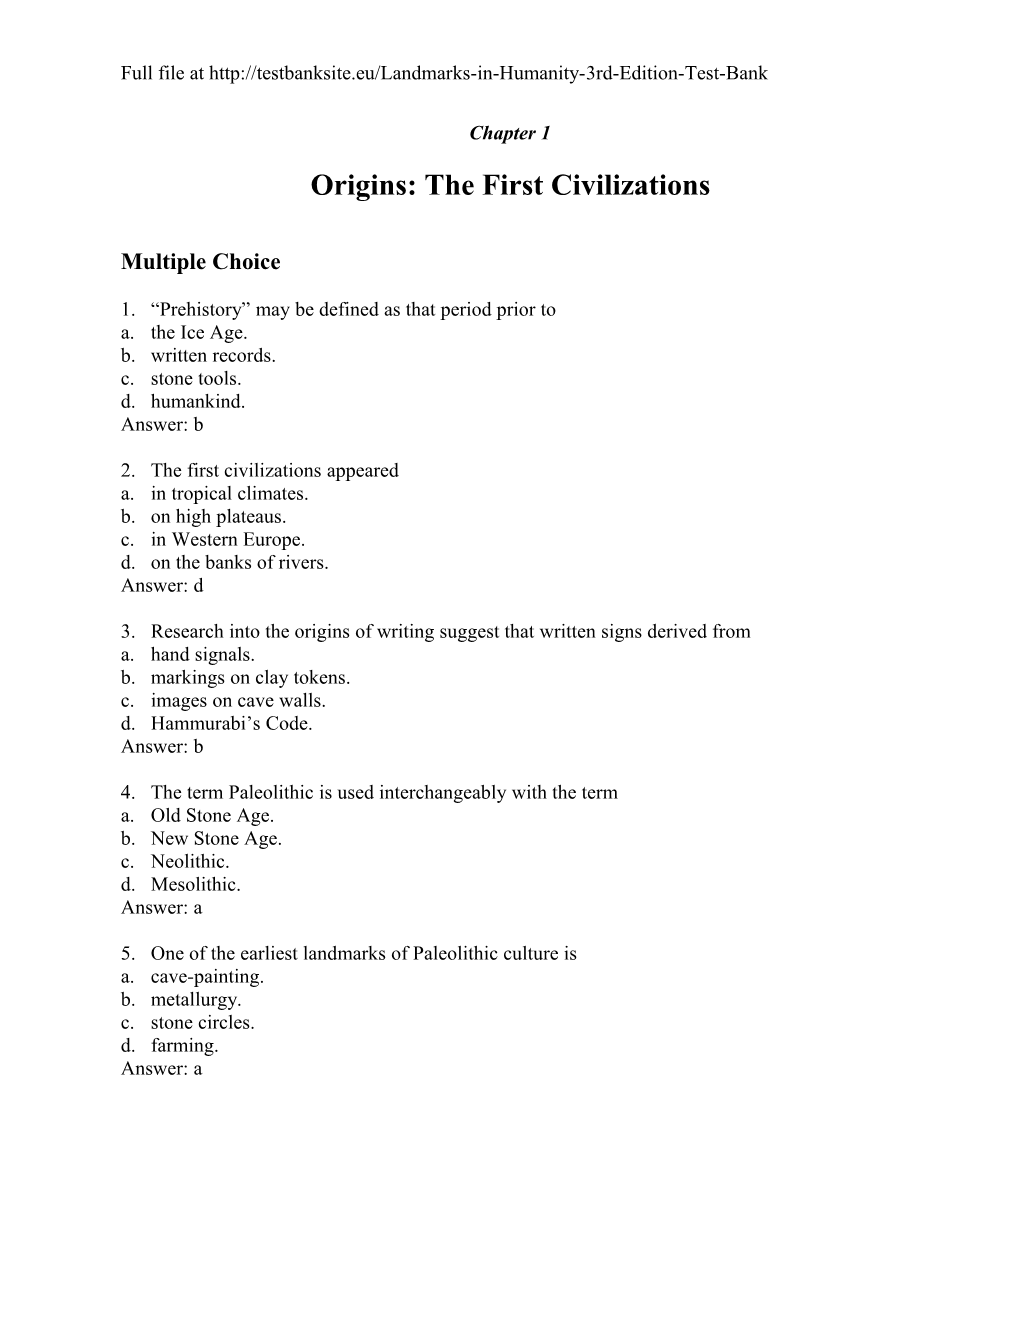 Chapter 1 ORIGINS: the First Civilizations